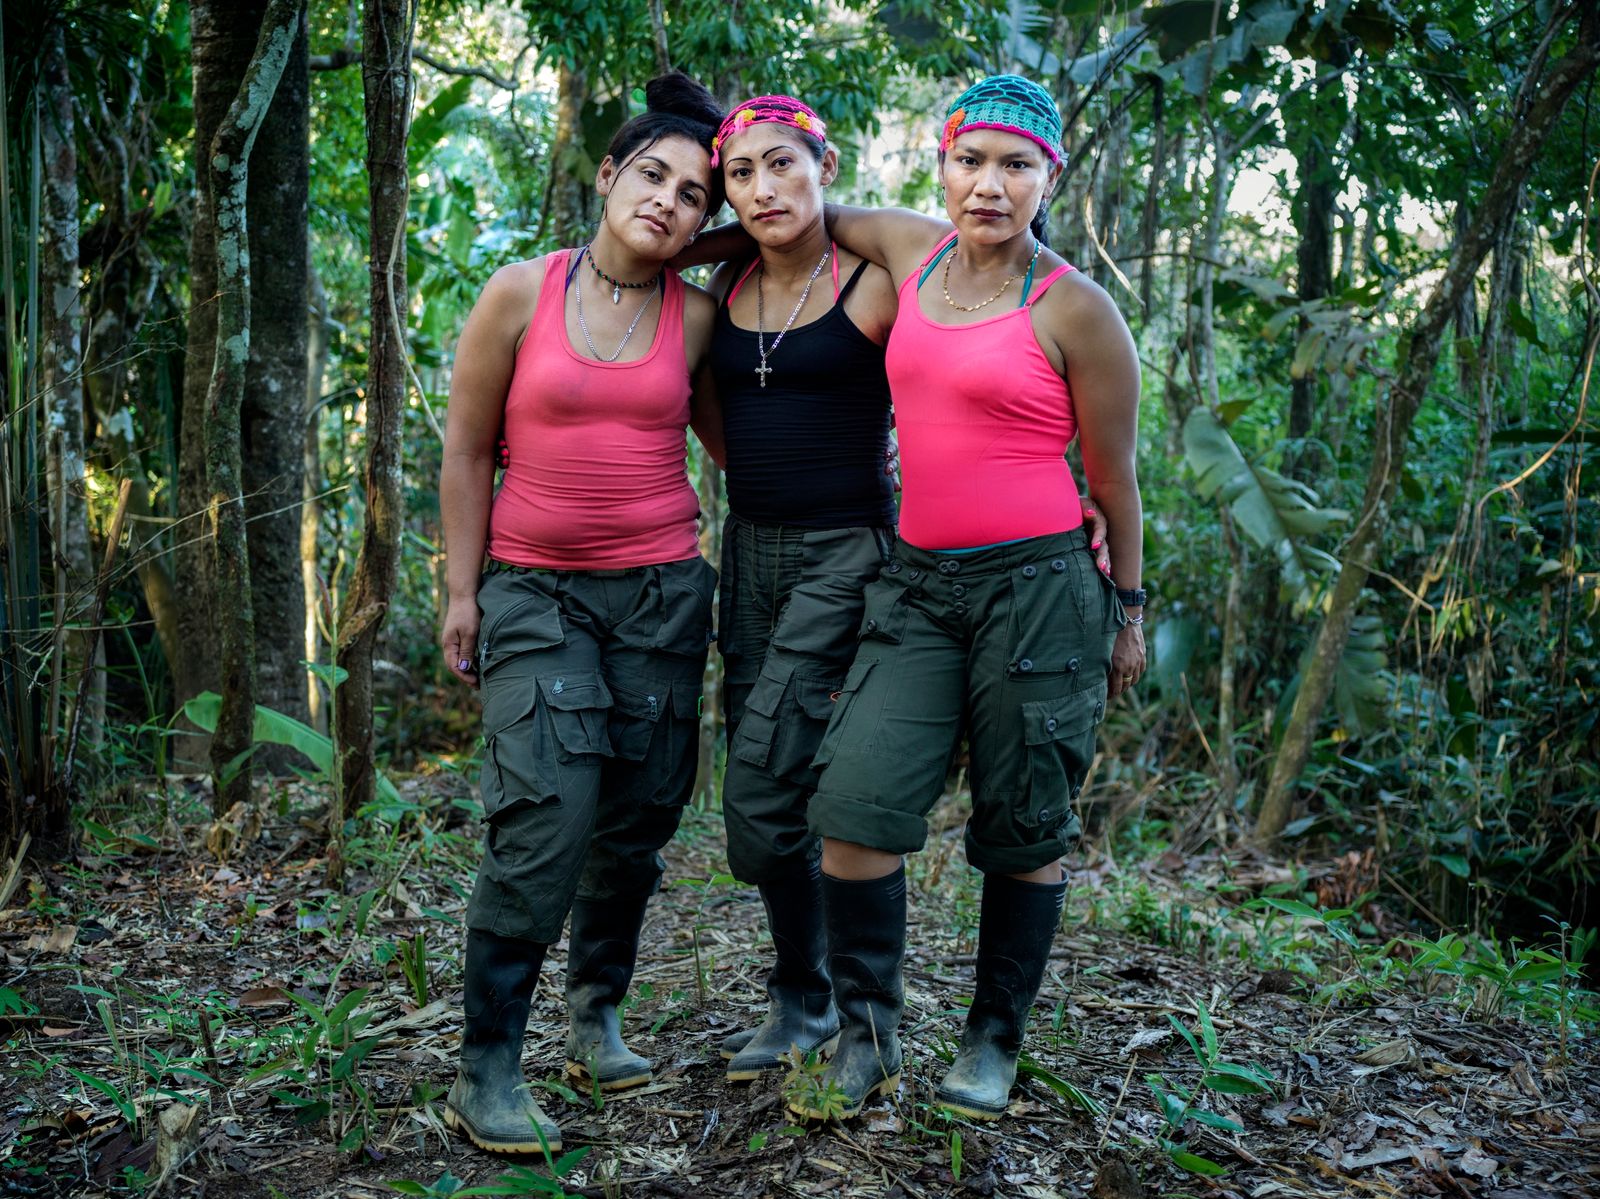 © Mads Nissen - Image from the Hope over Fear - Colombia's struggle for peace photography project